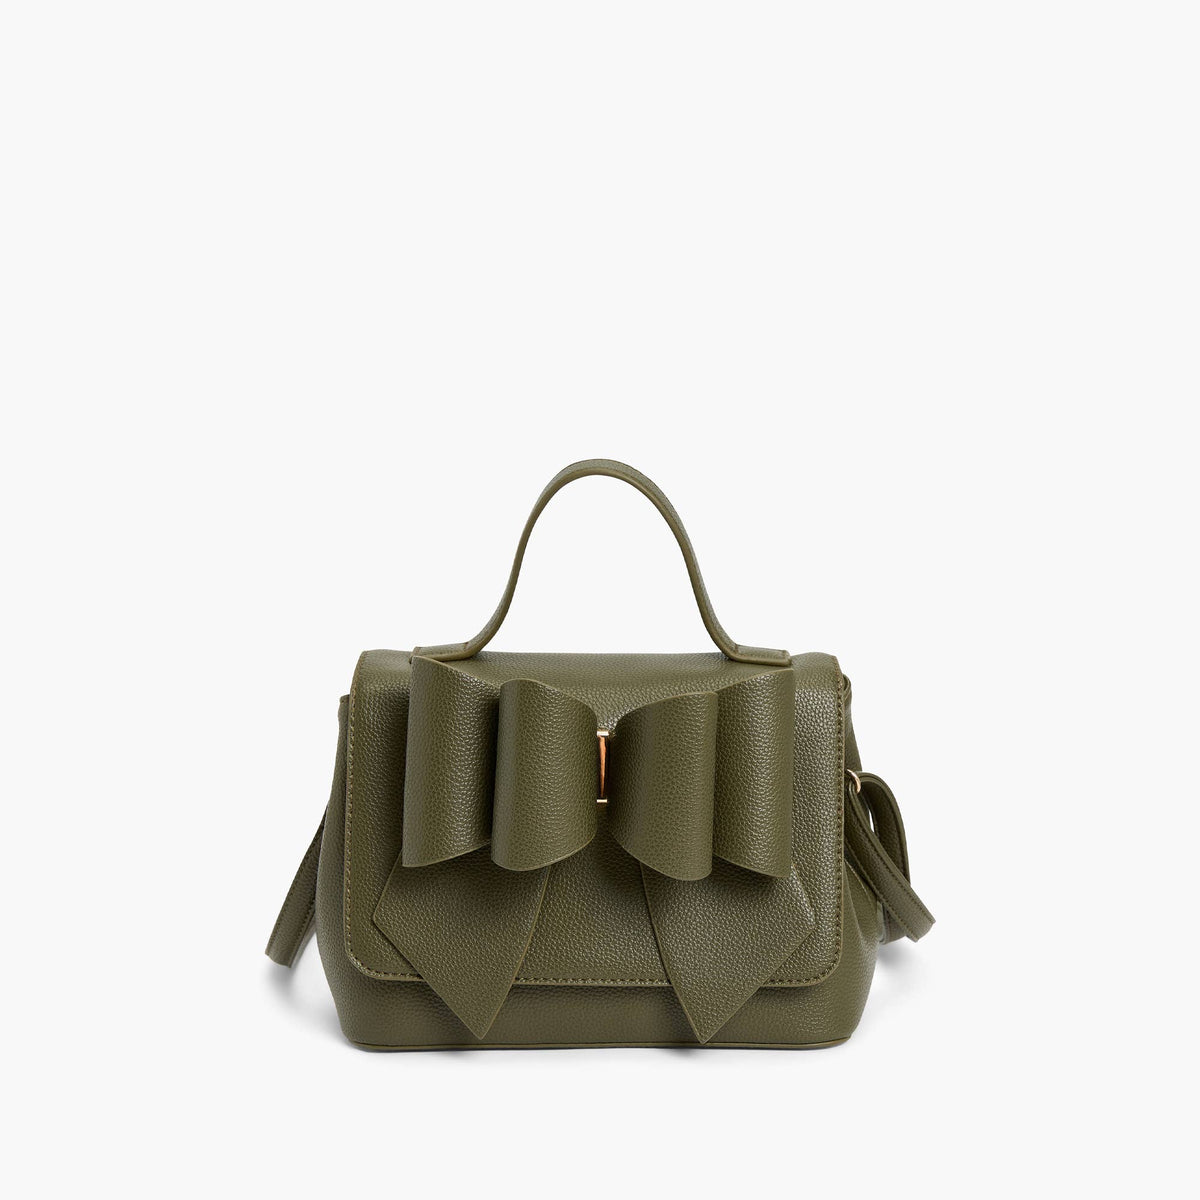 CLEARANCE: Olive Double Bow Satchel - Vegan Leather